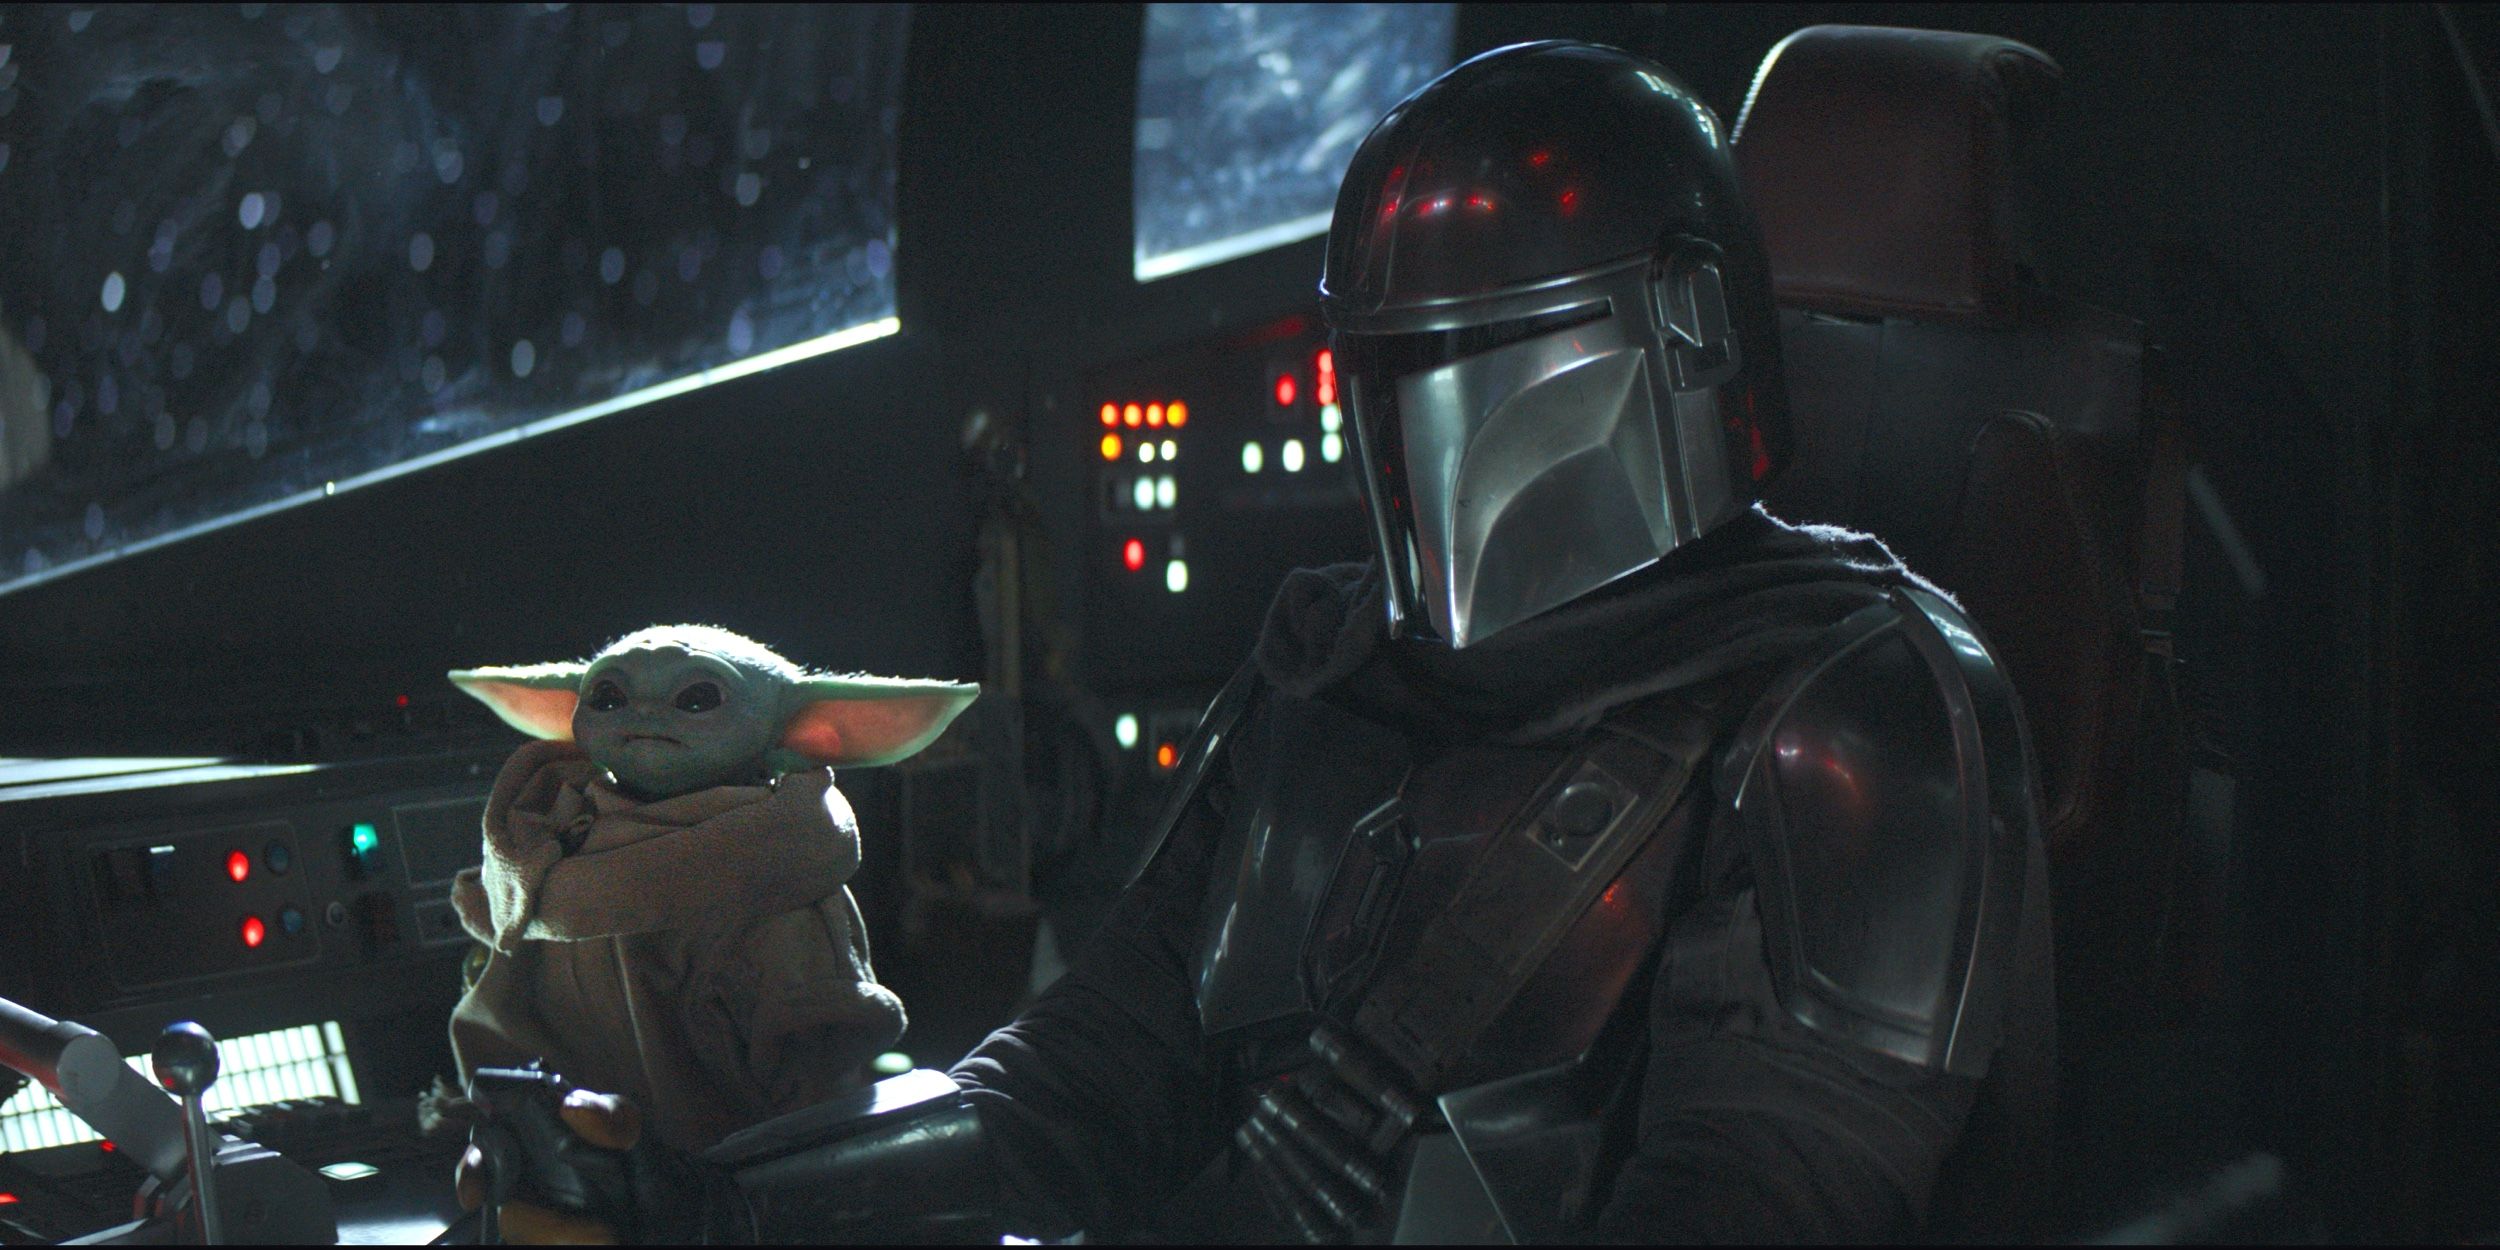 Baby Yoda and Din Djarin in The Mandalorian int he cockpit of the Razor crest